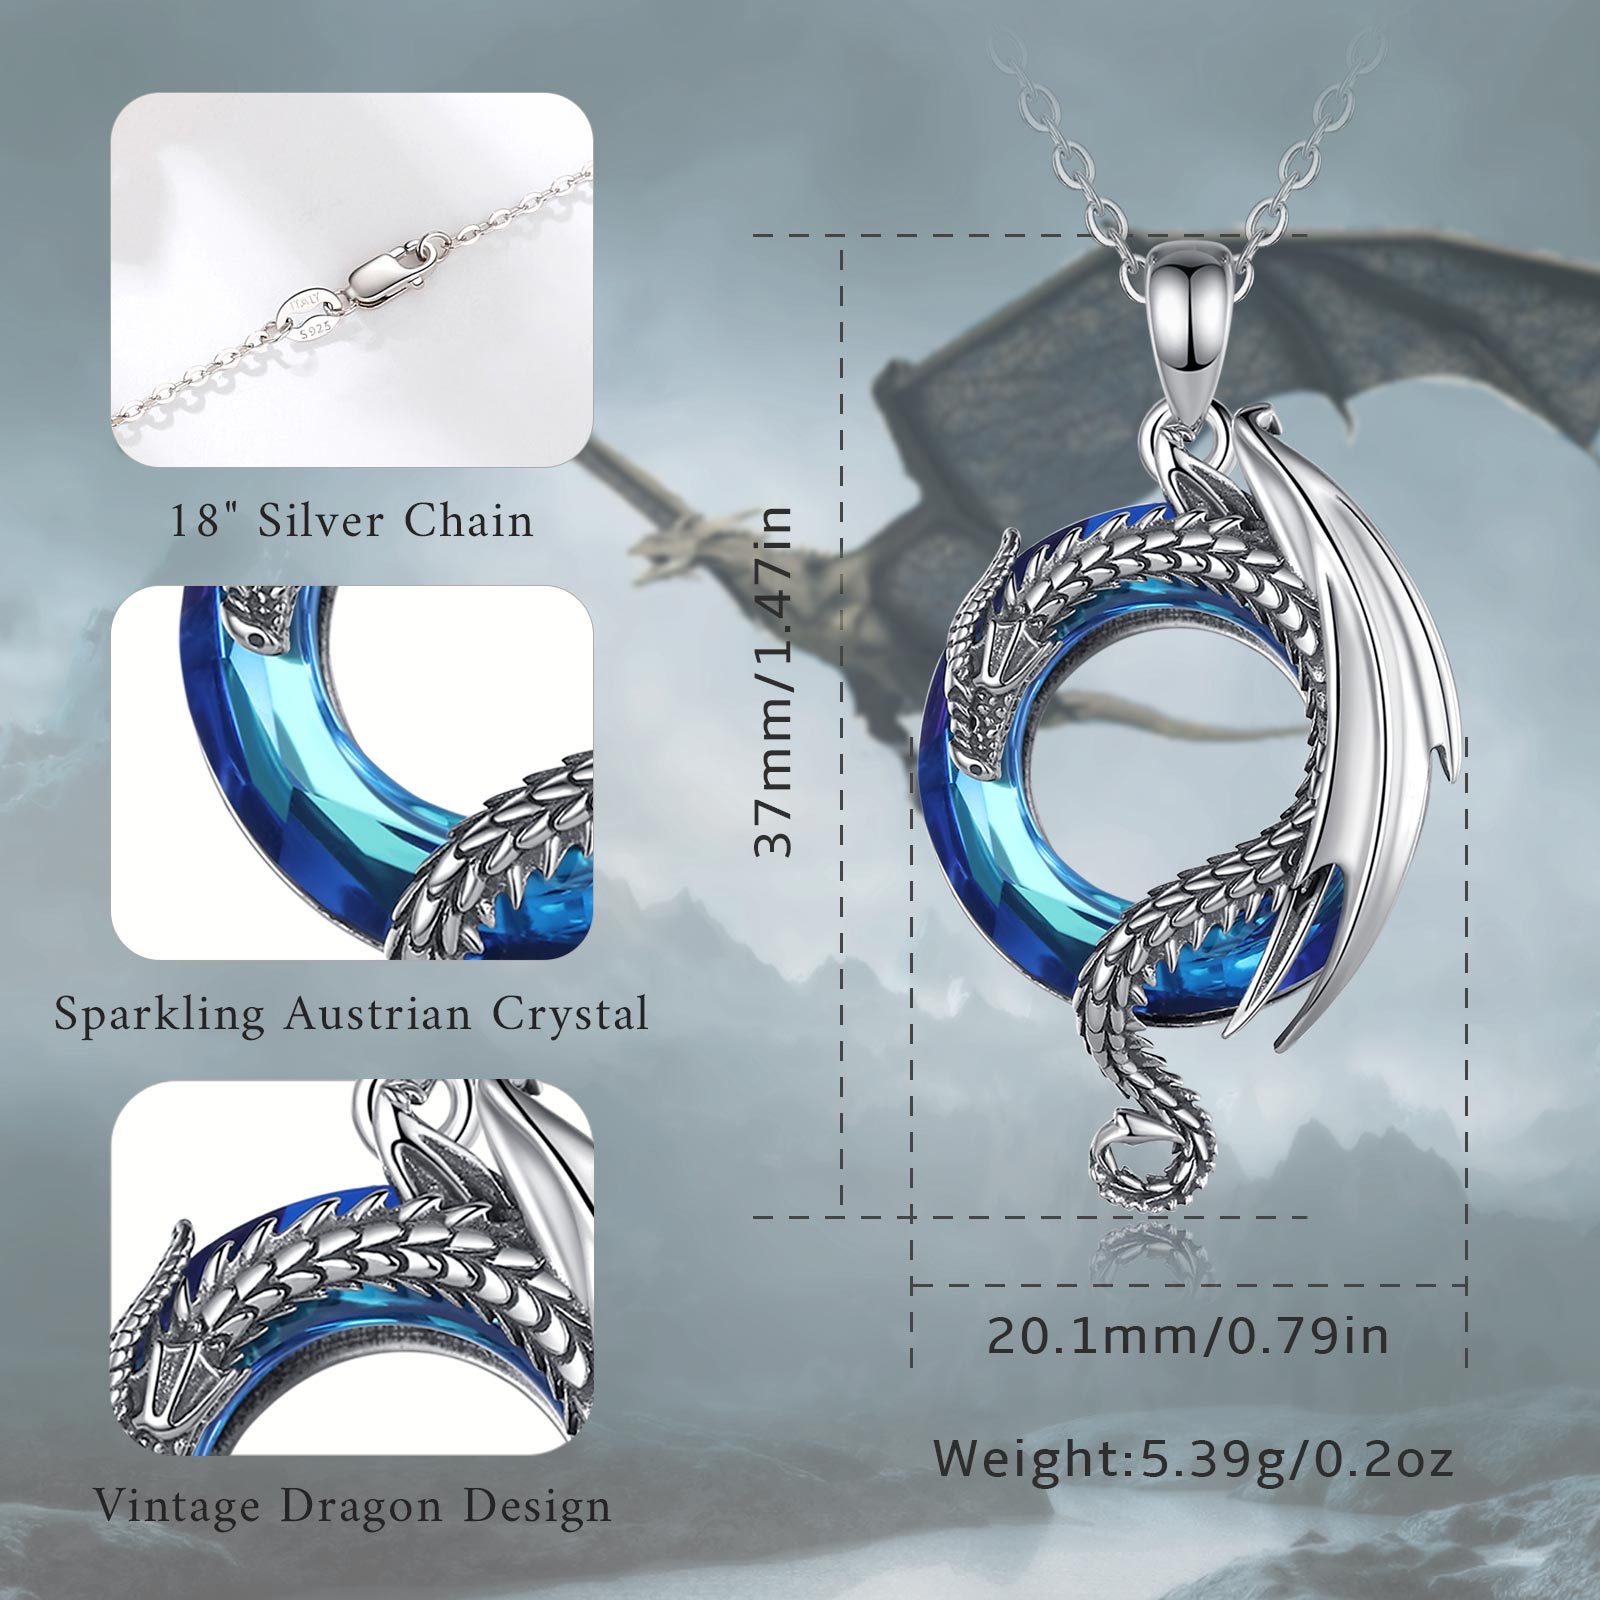 Merryshine 925 sterling silver crystal material mysterious fly dragon design pendant necklace